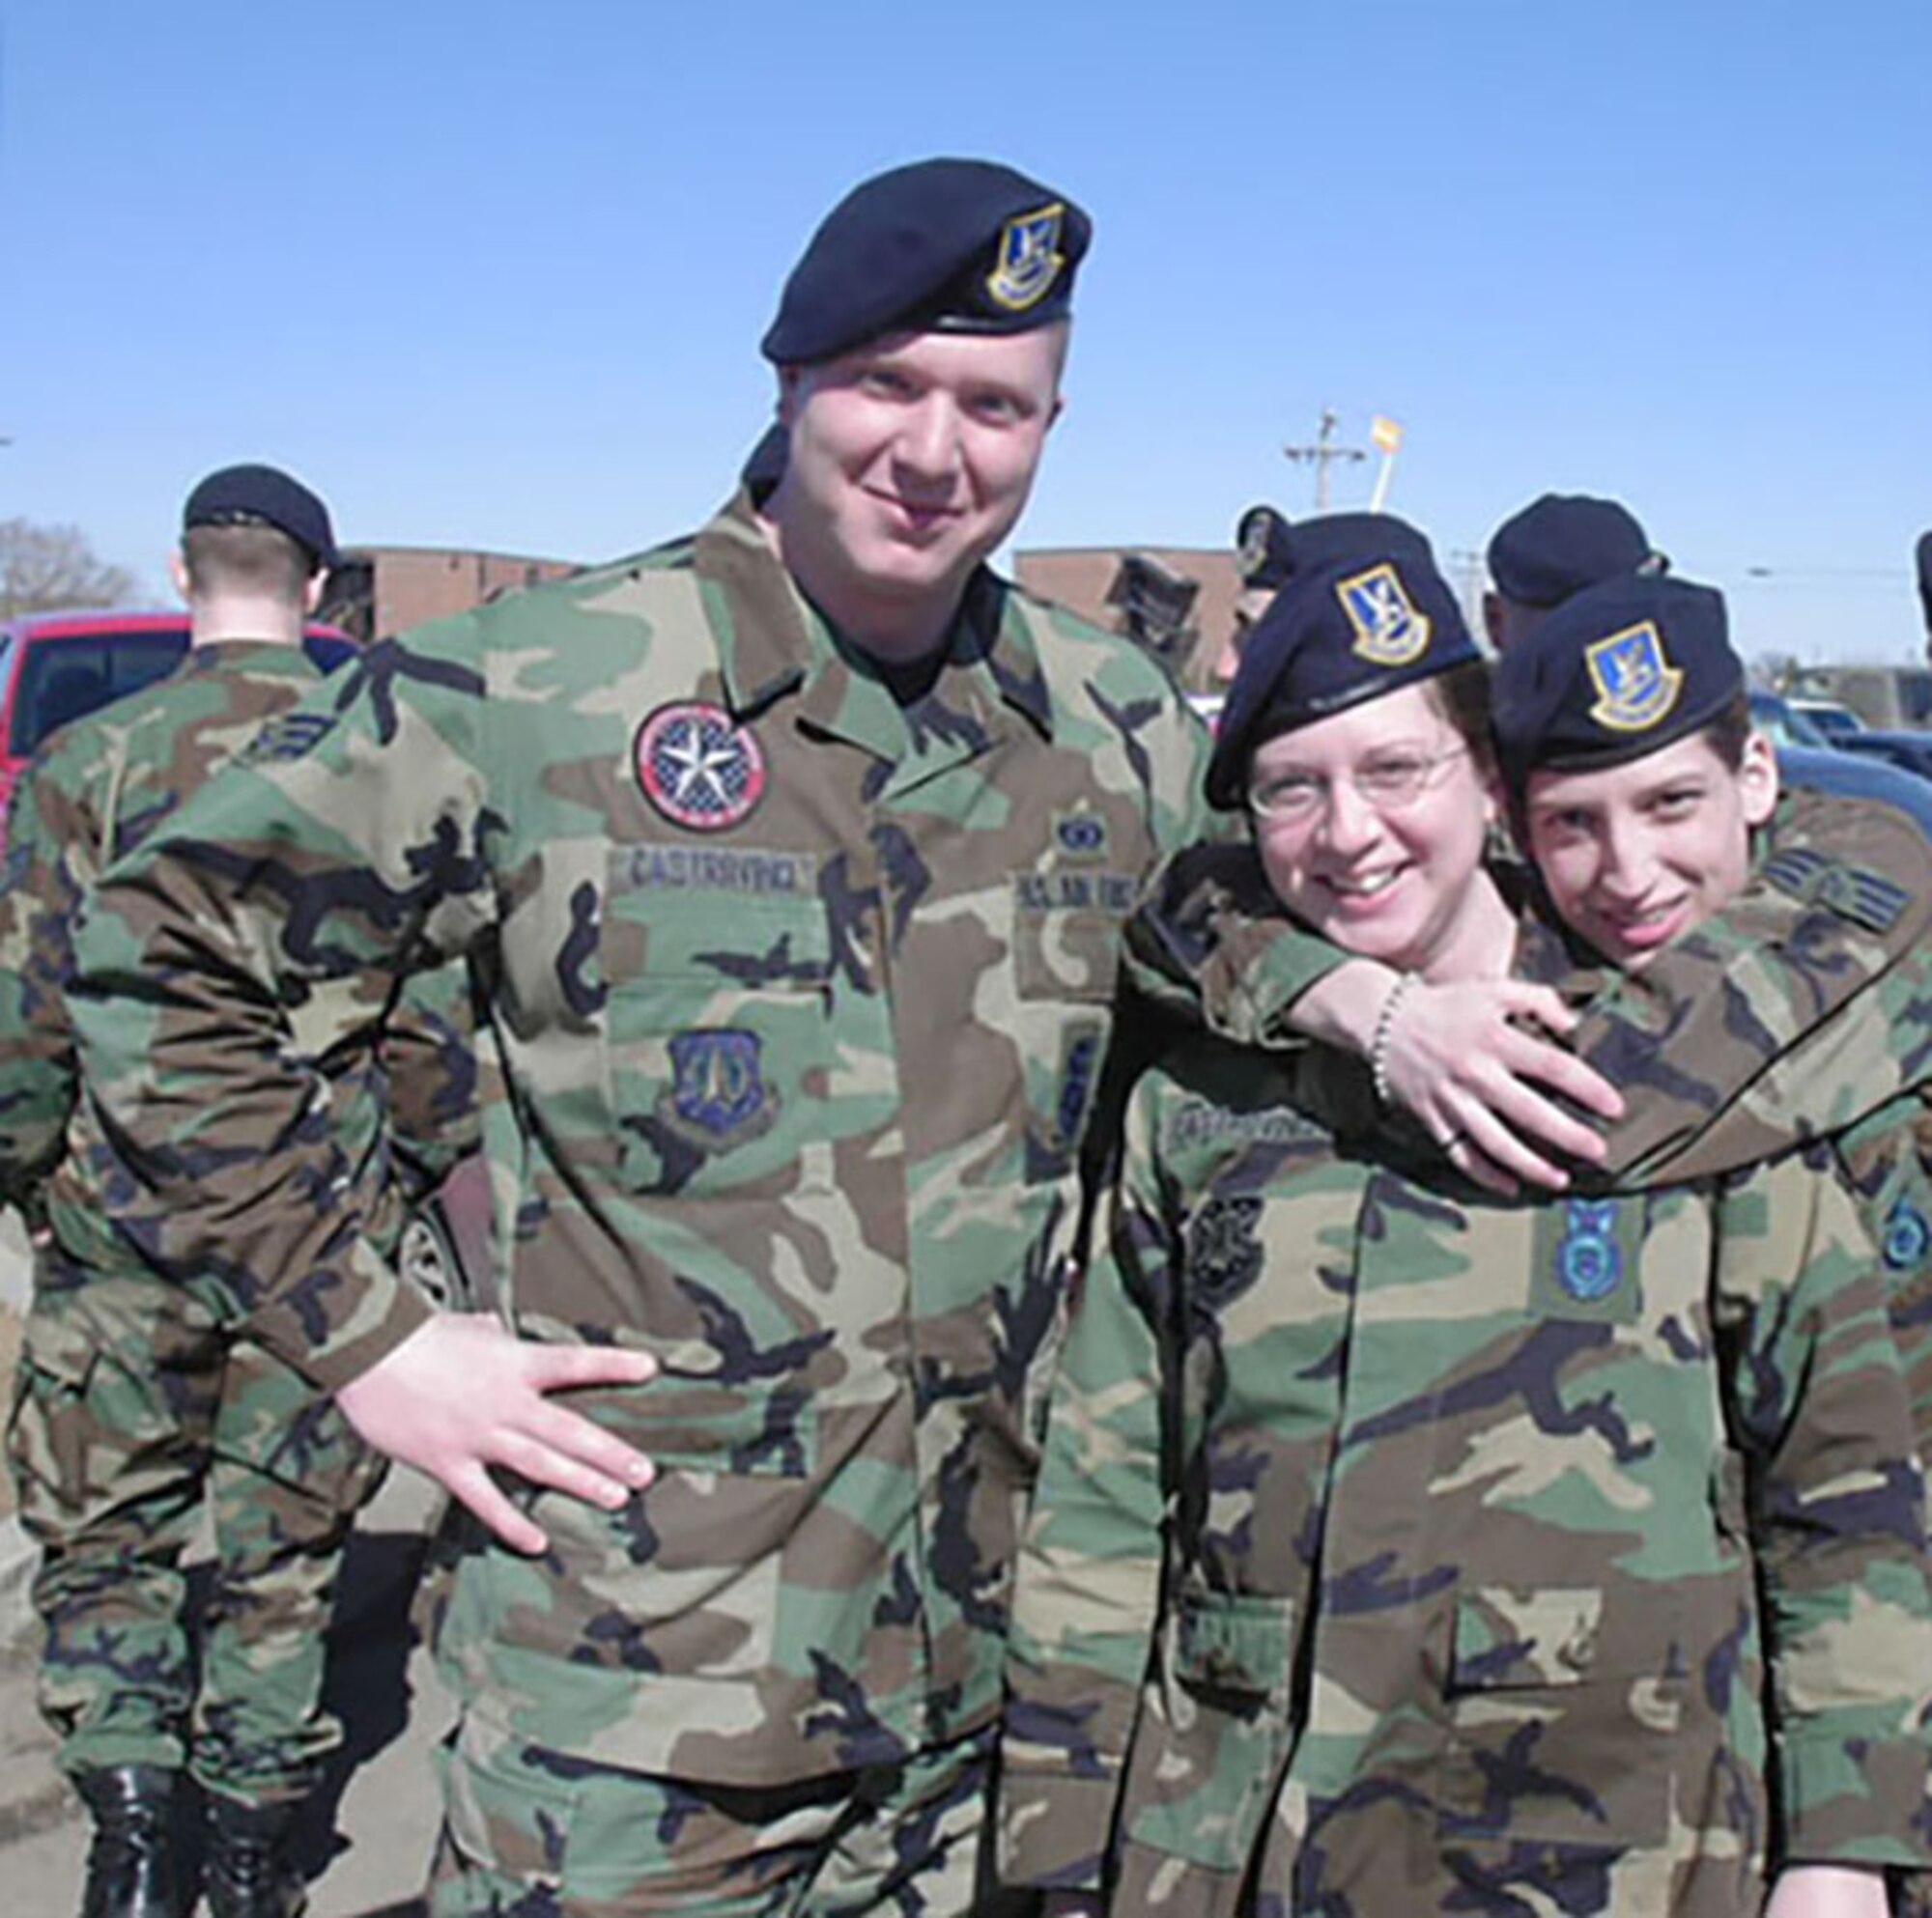 U.S. Air Force Senior Airman Scott Castrovinci, left, and Senior Airman  Rachel Castrovinci, center, met while stationed at Minot Air Force Base, North Dakota, in  2001. The couple, now a chief master sergeant and a senior master sergeant, worked in the  740th Missile Squadron on Sept. 11, 2001. Senior Master Sgt. Castrovinci has since cross trained to airfield management and the pair shared their memories and story for the 20th anniversary of 9/11. (Courtesy photo)